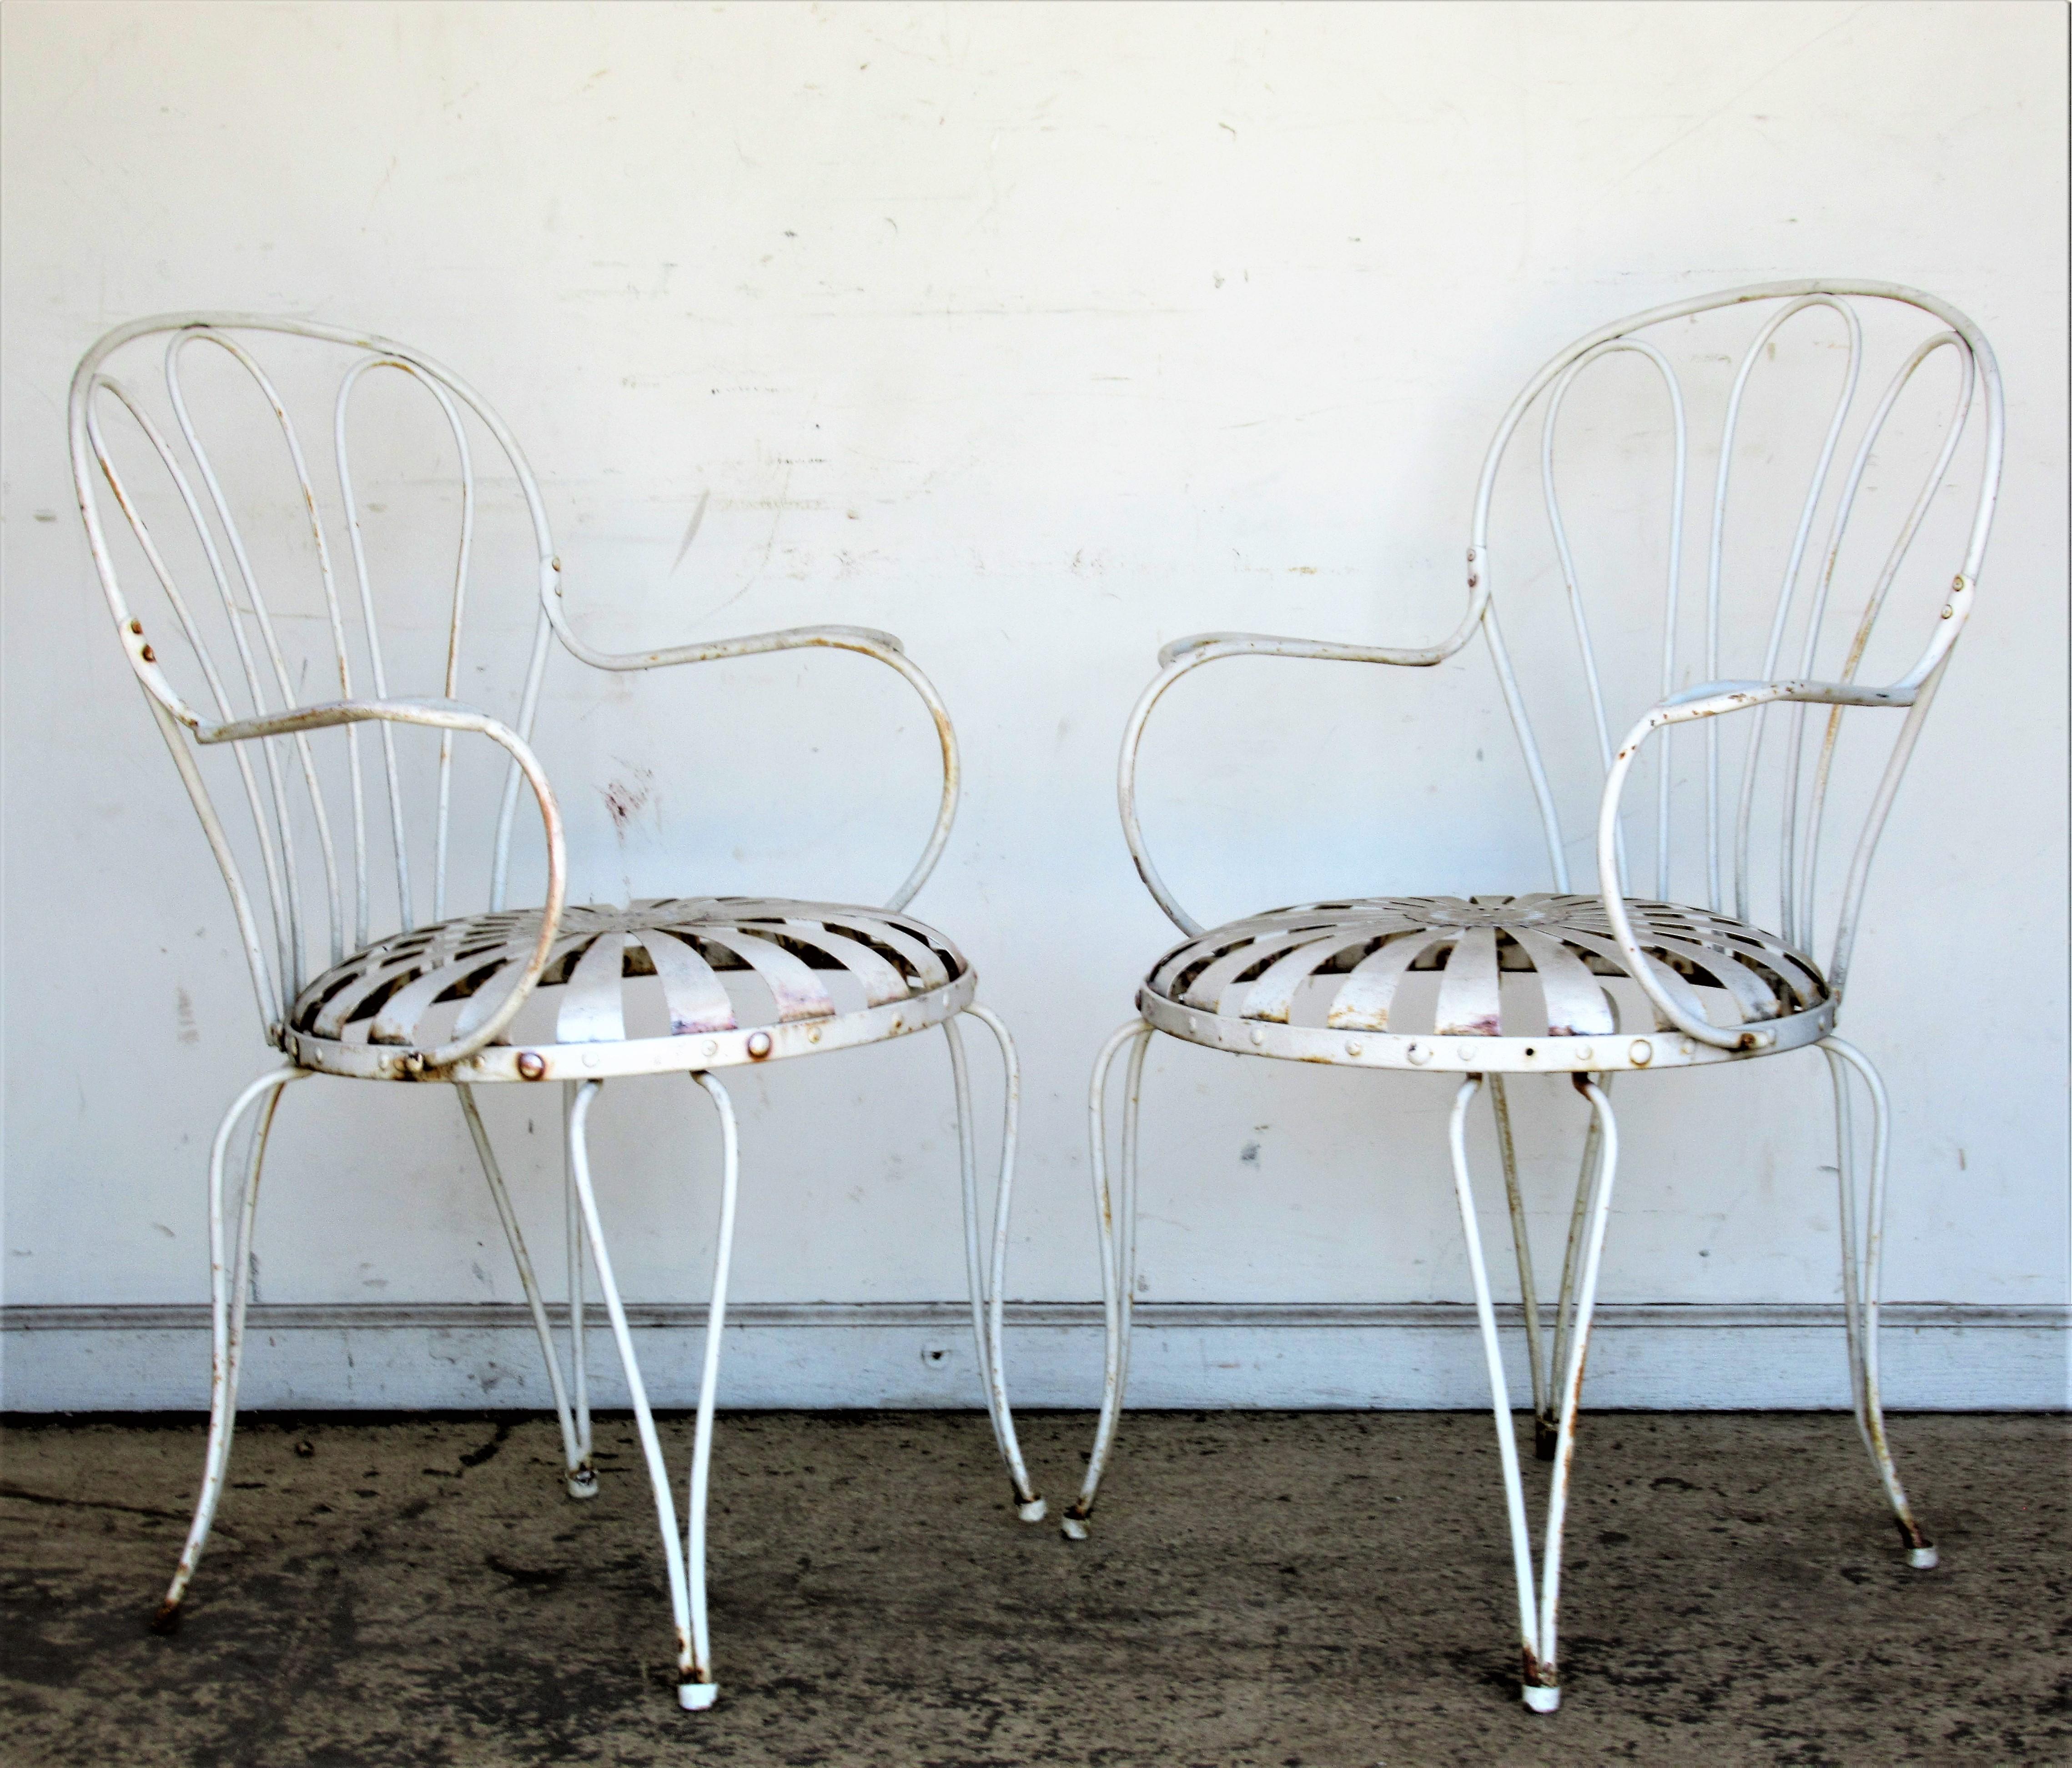 Francois Carre Iron Garden Chairs 11